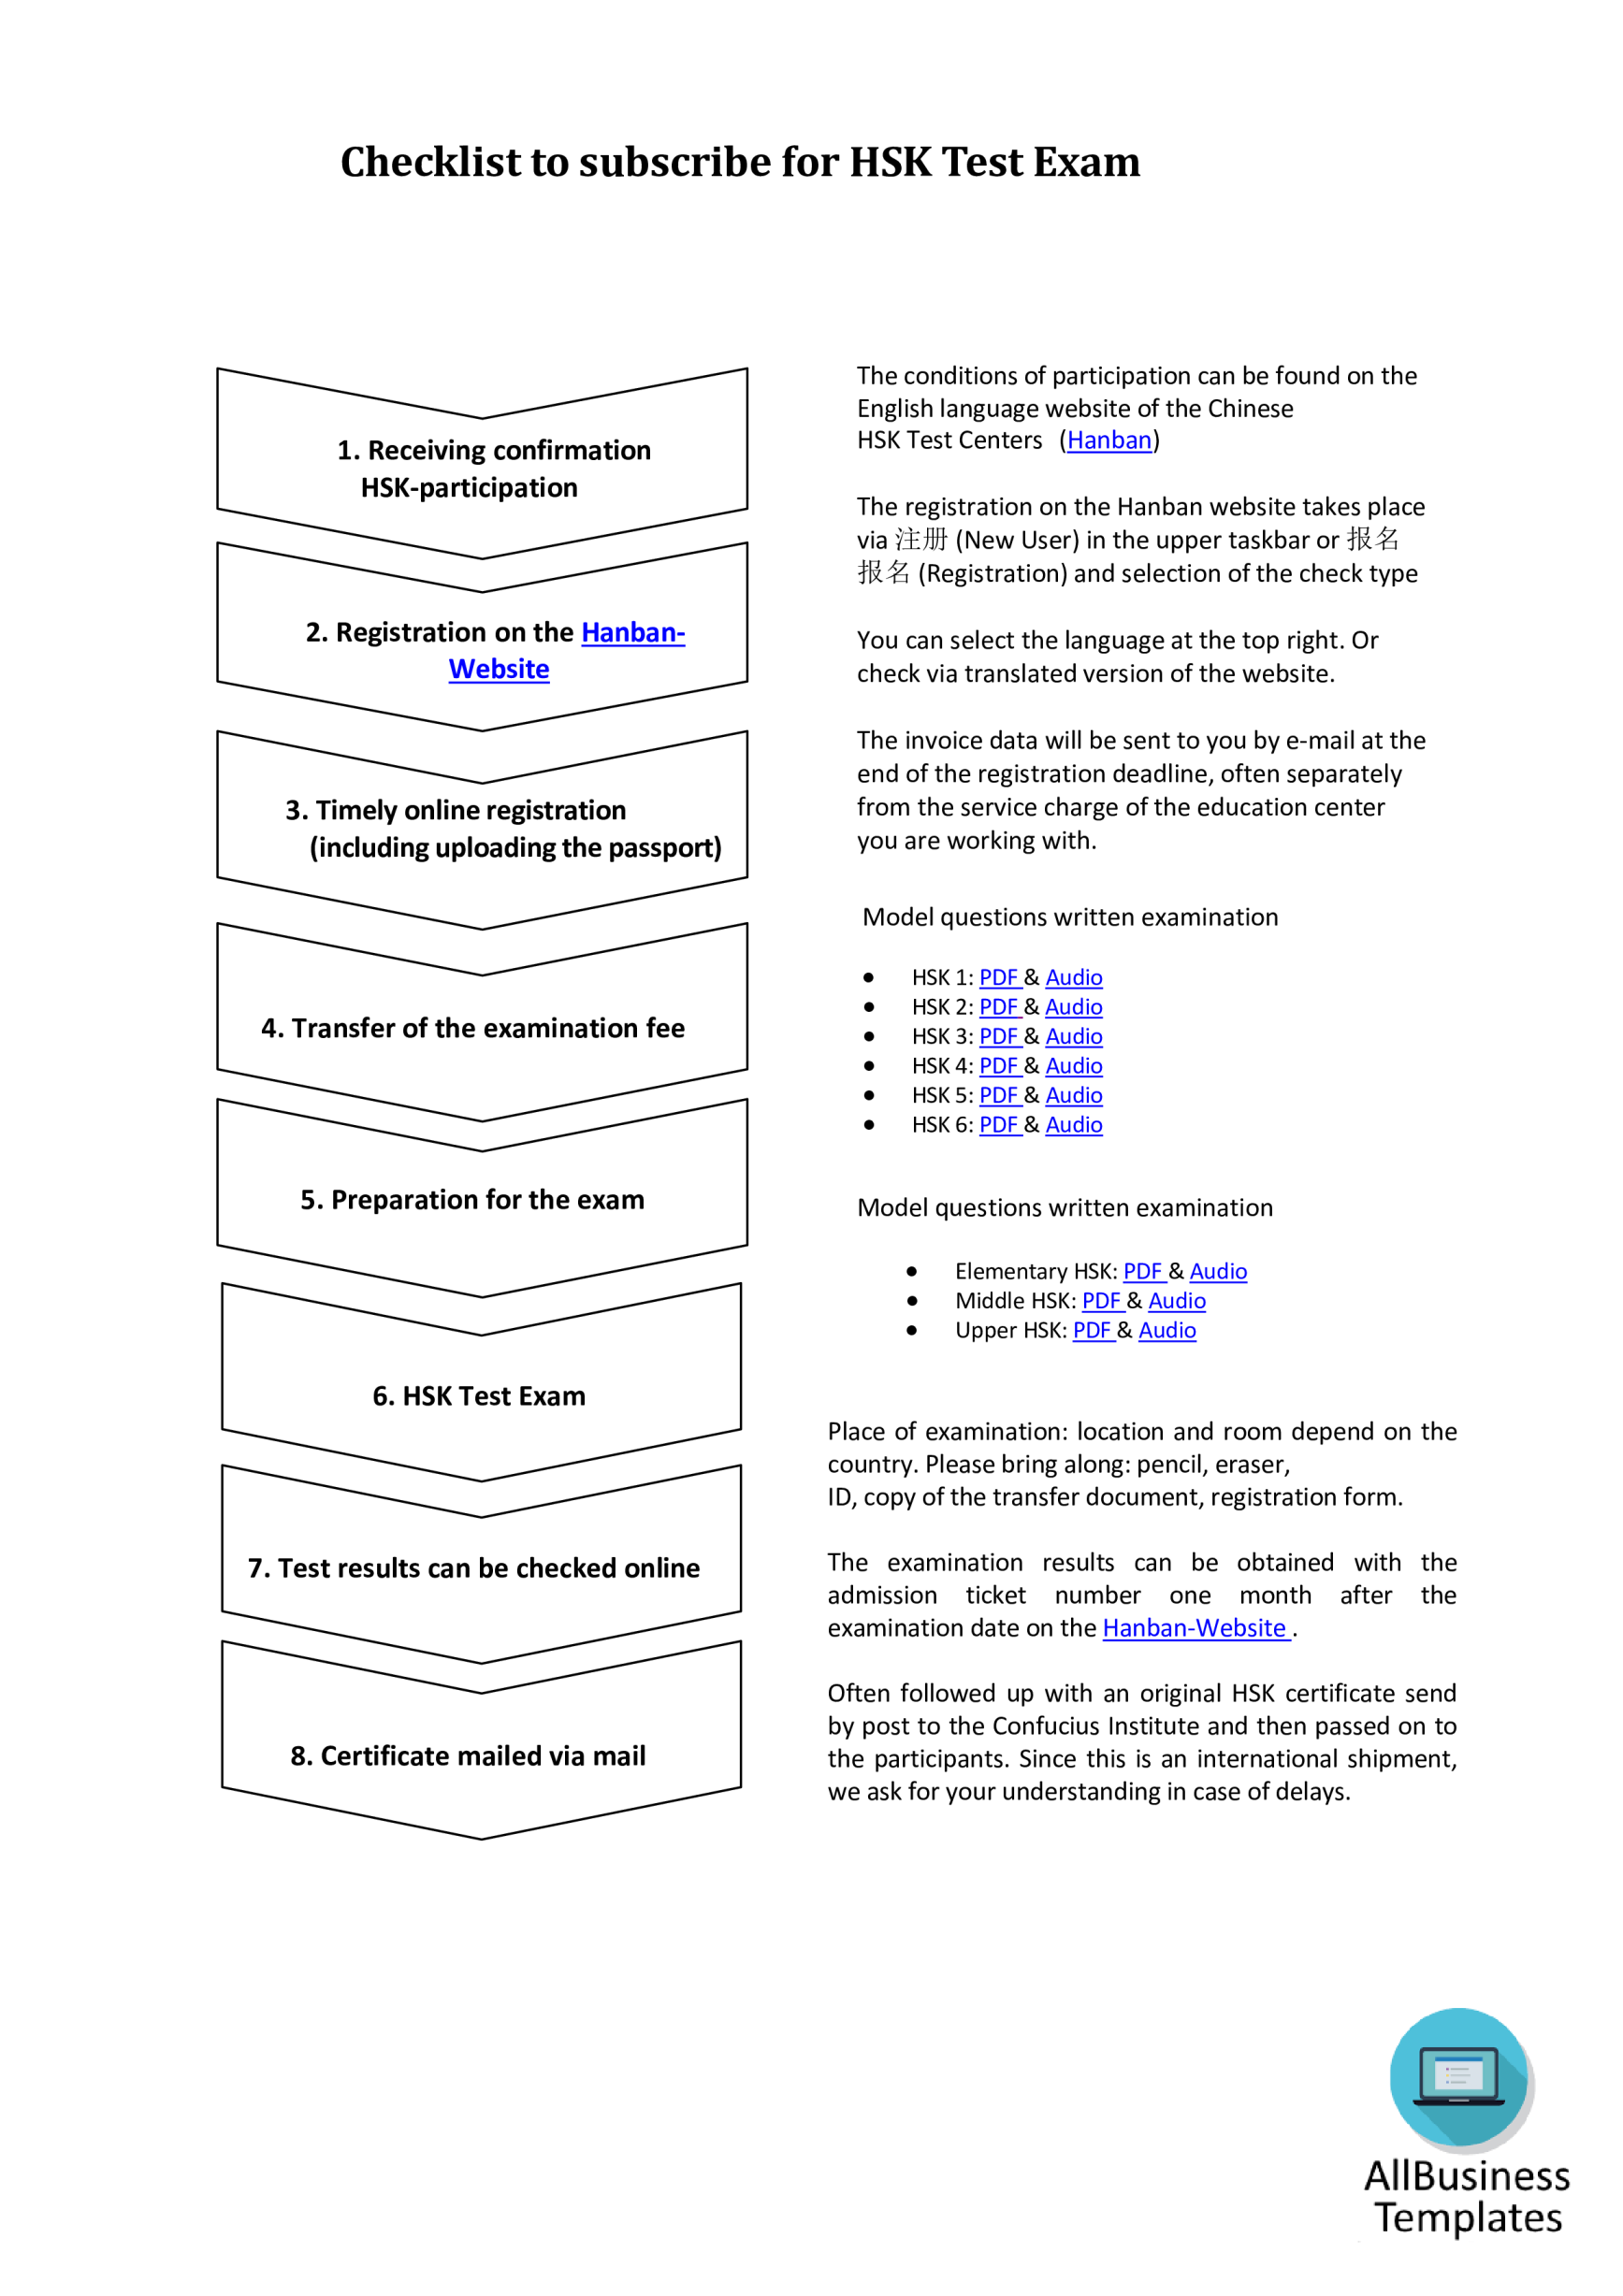 template preview imageHSK Test Exam checklist